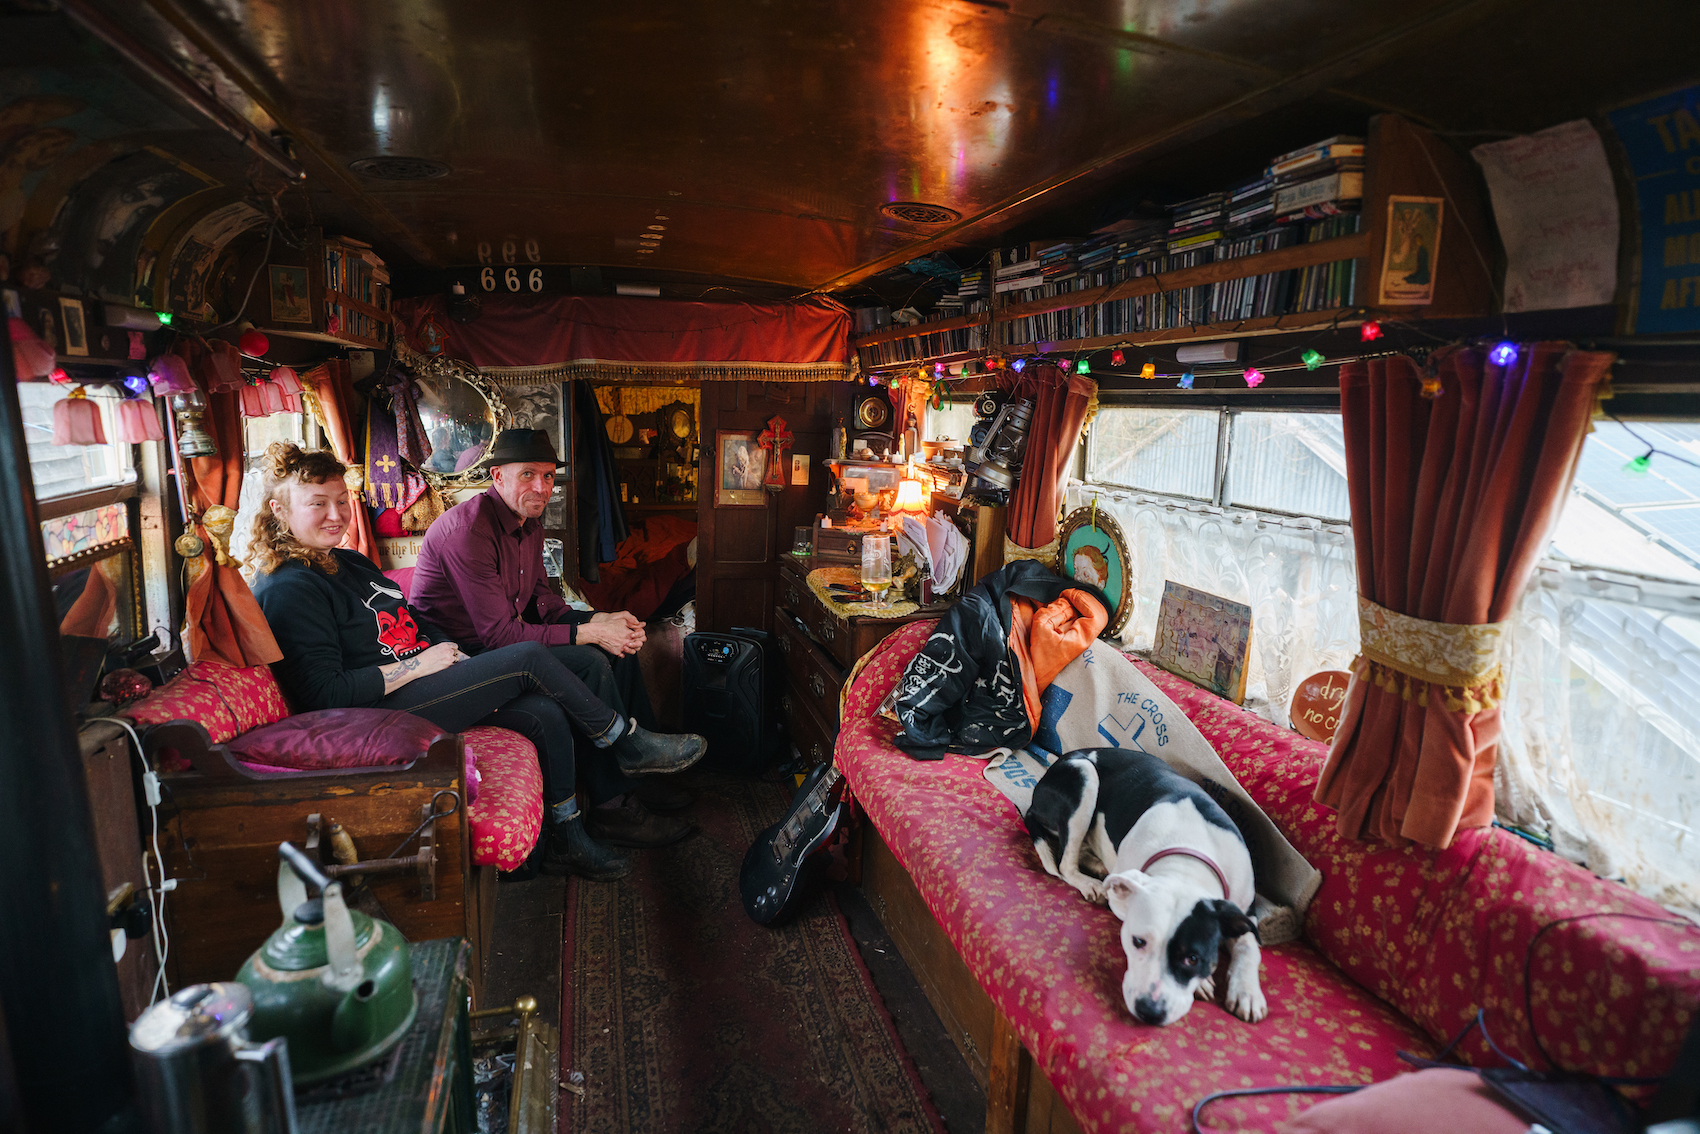 A couple sit in their caravan with their dog, surrounded by red decor.